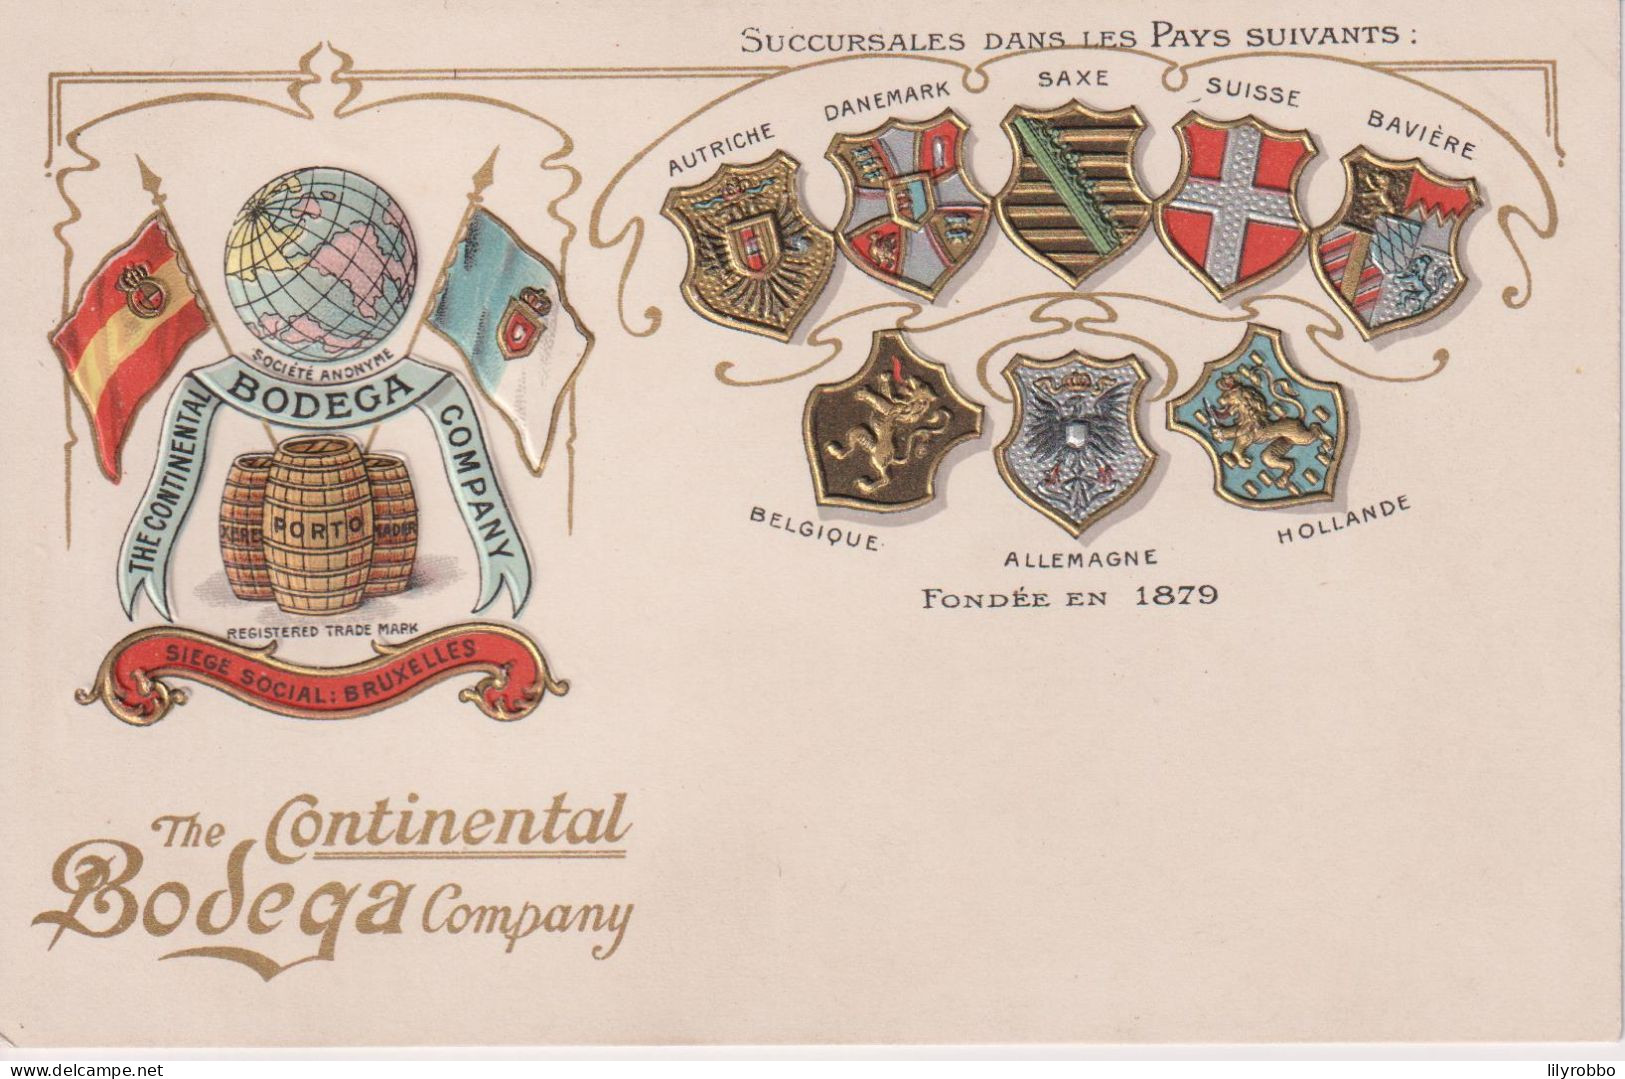 BELGIUM - ADvertising THE CONTINENTAL BODEGA COMPANY. With Country Crests. Embossed & Undivided Rear - Publicité